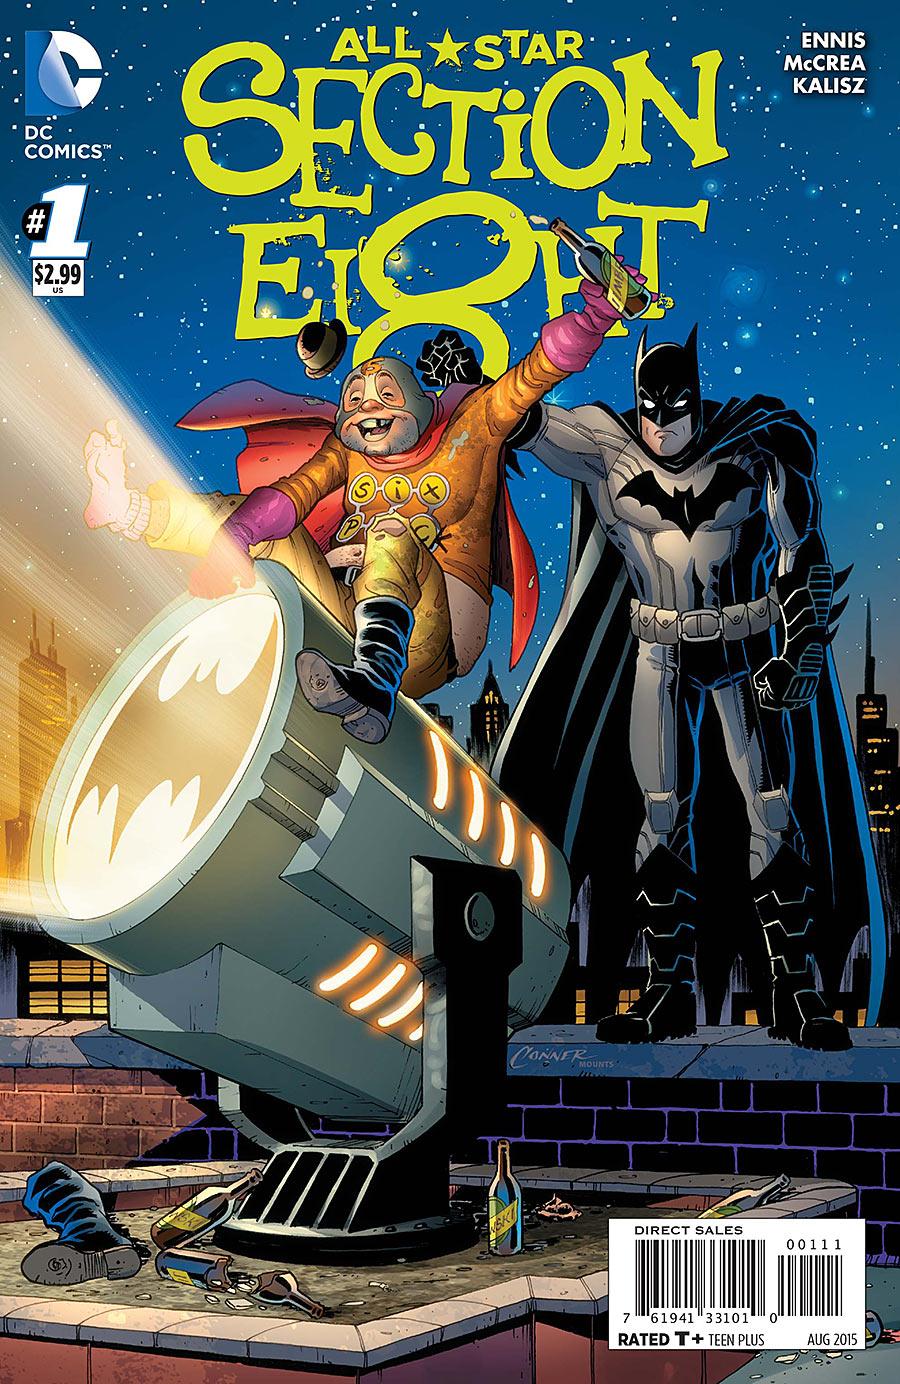 All Star Section Eight Vol. 1 #1